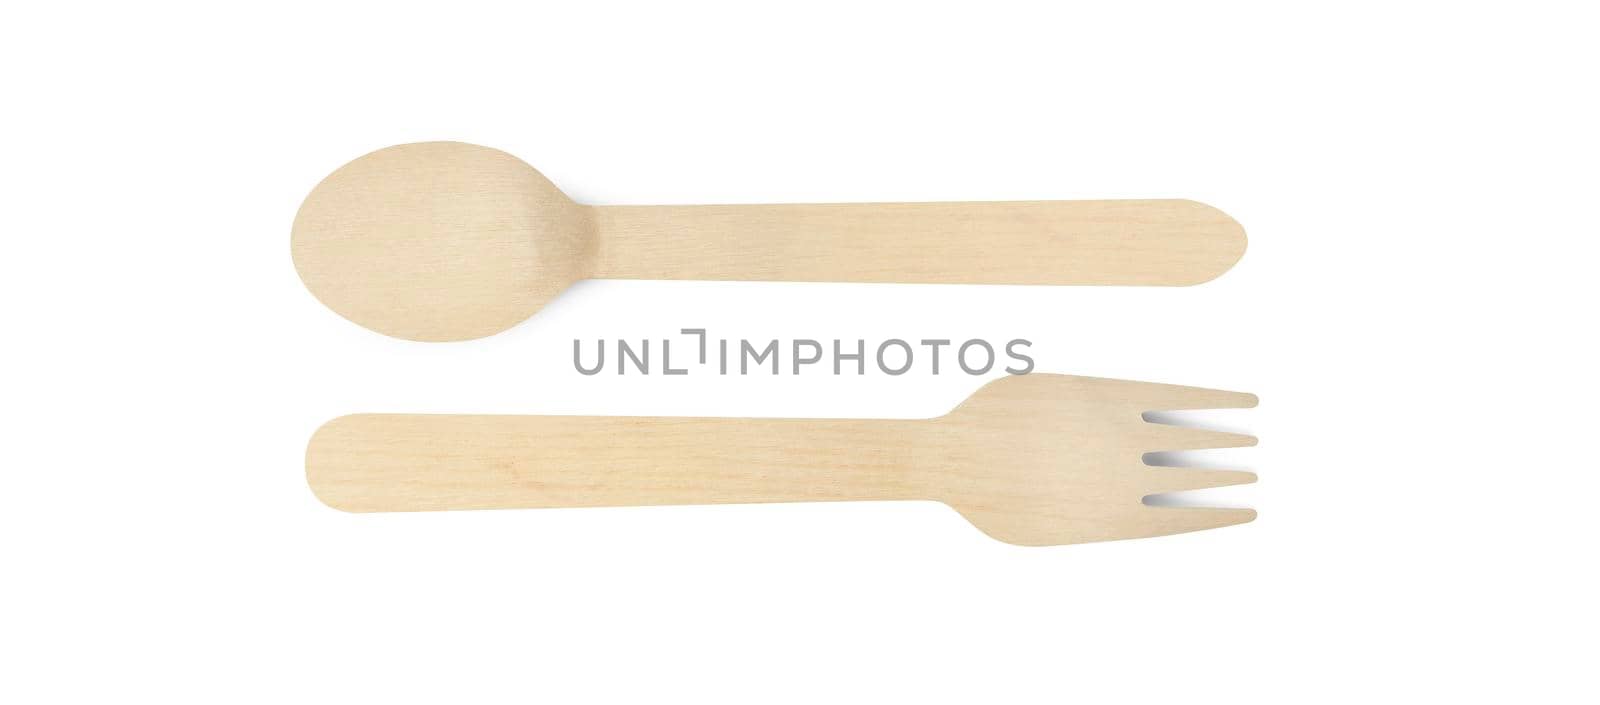 Wooden spoon and fork isolated on white background with clipping path.